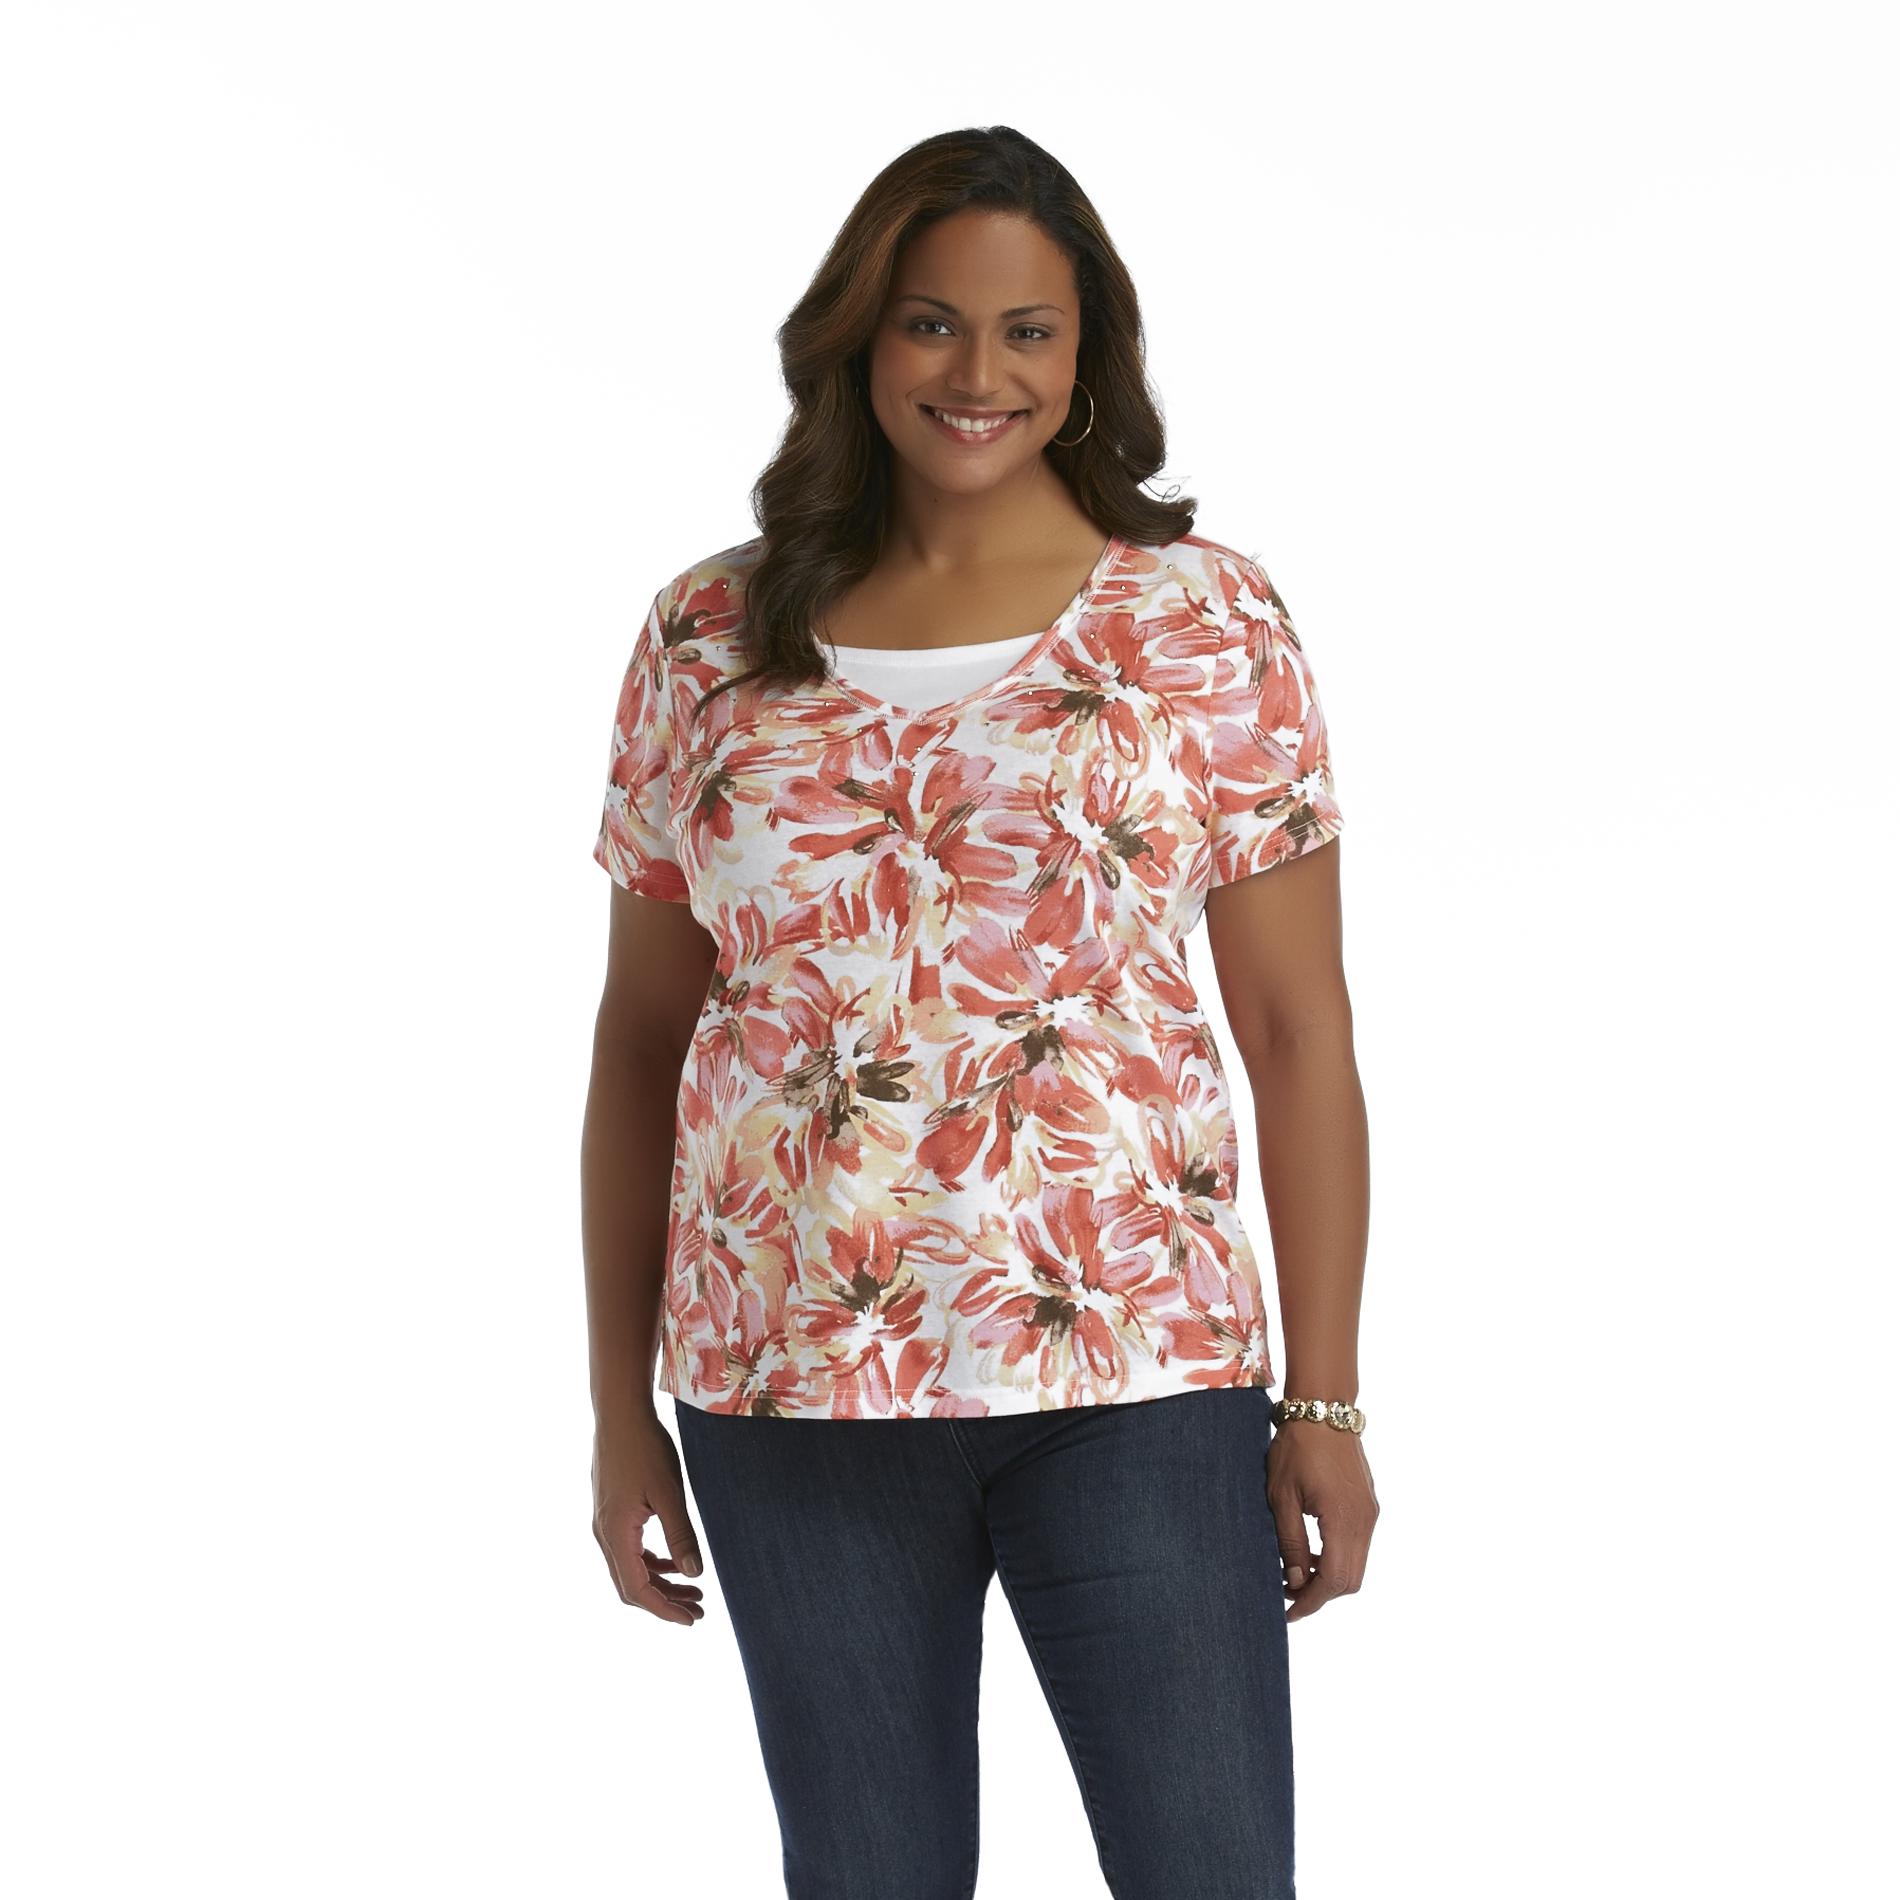 Basic Editions Women's Plus Layered V-Neck Top - Floral